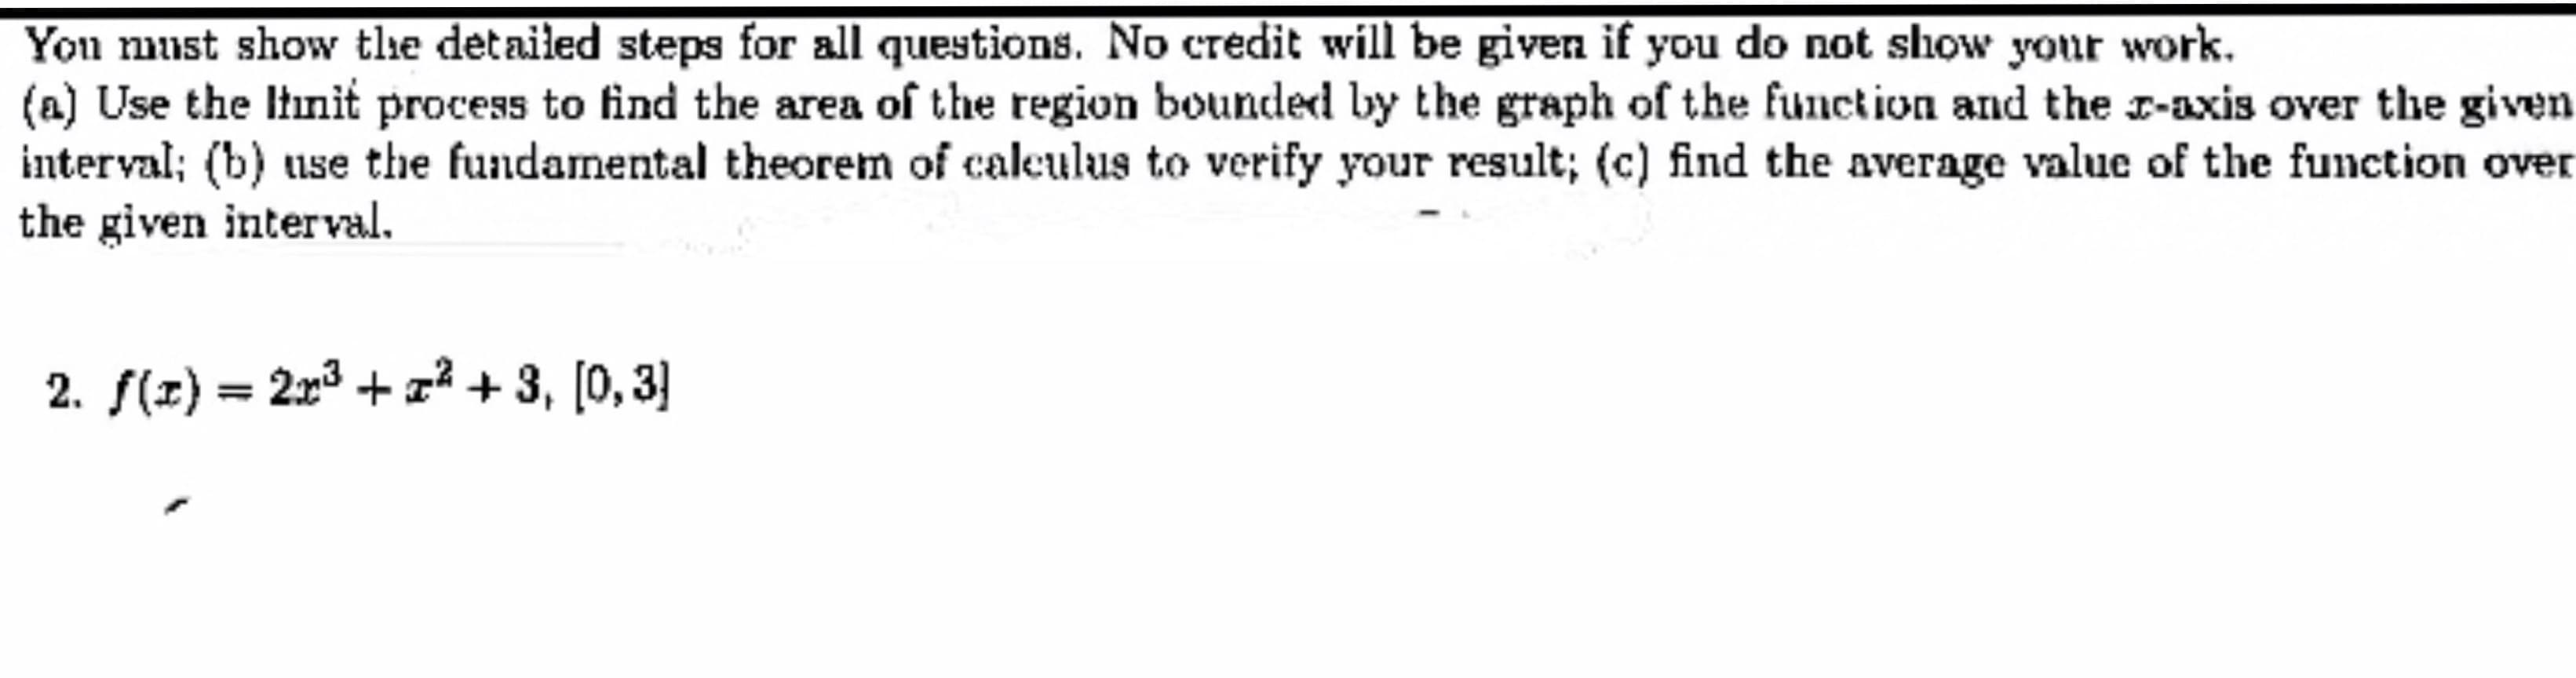 You must show tlhe detailed steps for all questions. No credit will be given if you do not show your work
(a) Use the Itnit process to find the area of the region bounded by the graph of the function and the r-axis over the given
interval; (b) use the fundamental theorem of caleulus to verify your result; (c) find the average value of the function over
the given interval
2. f(z) 2r3 +2 +3, [0,3
